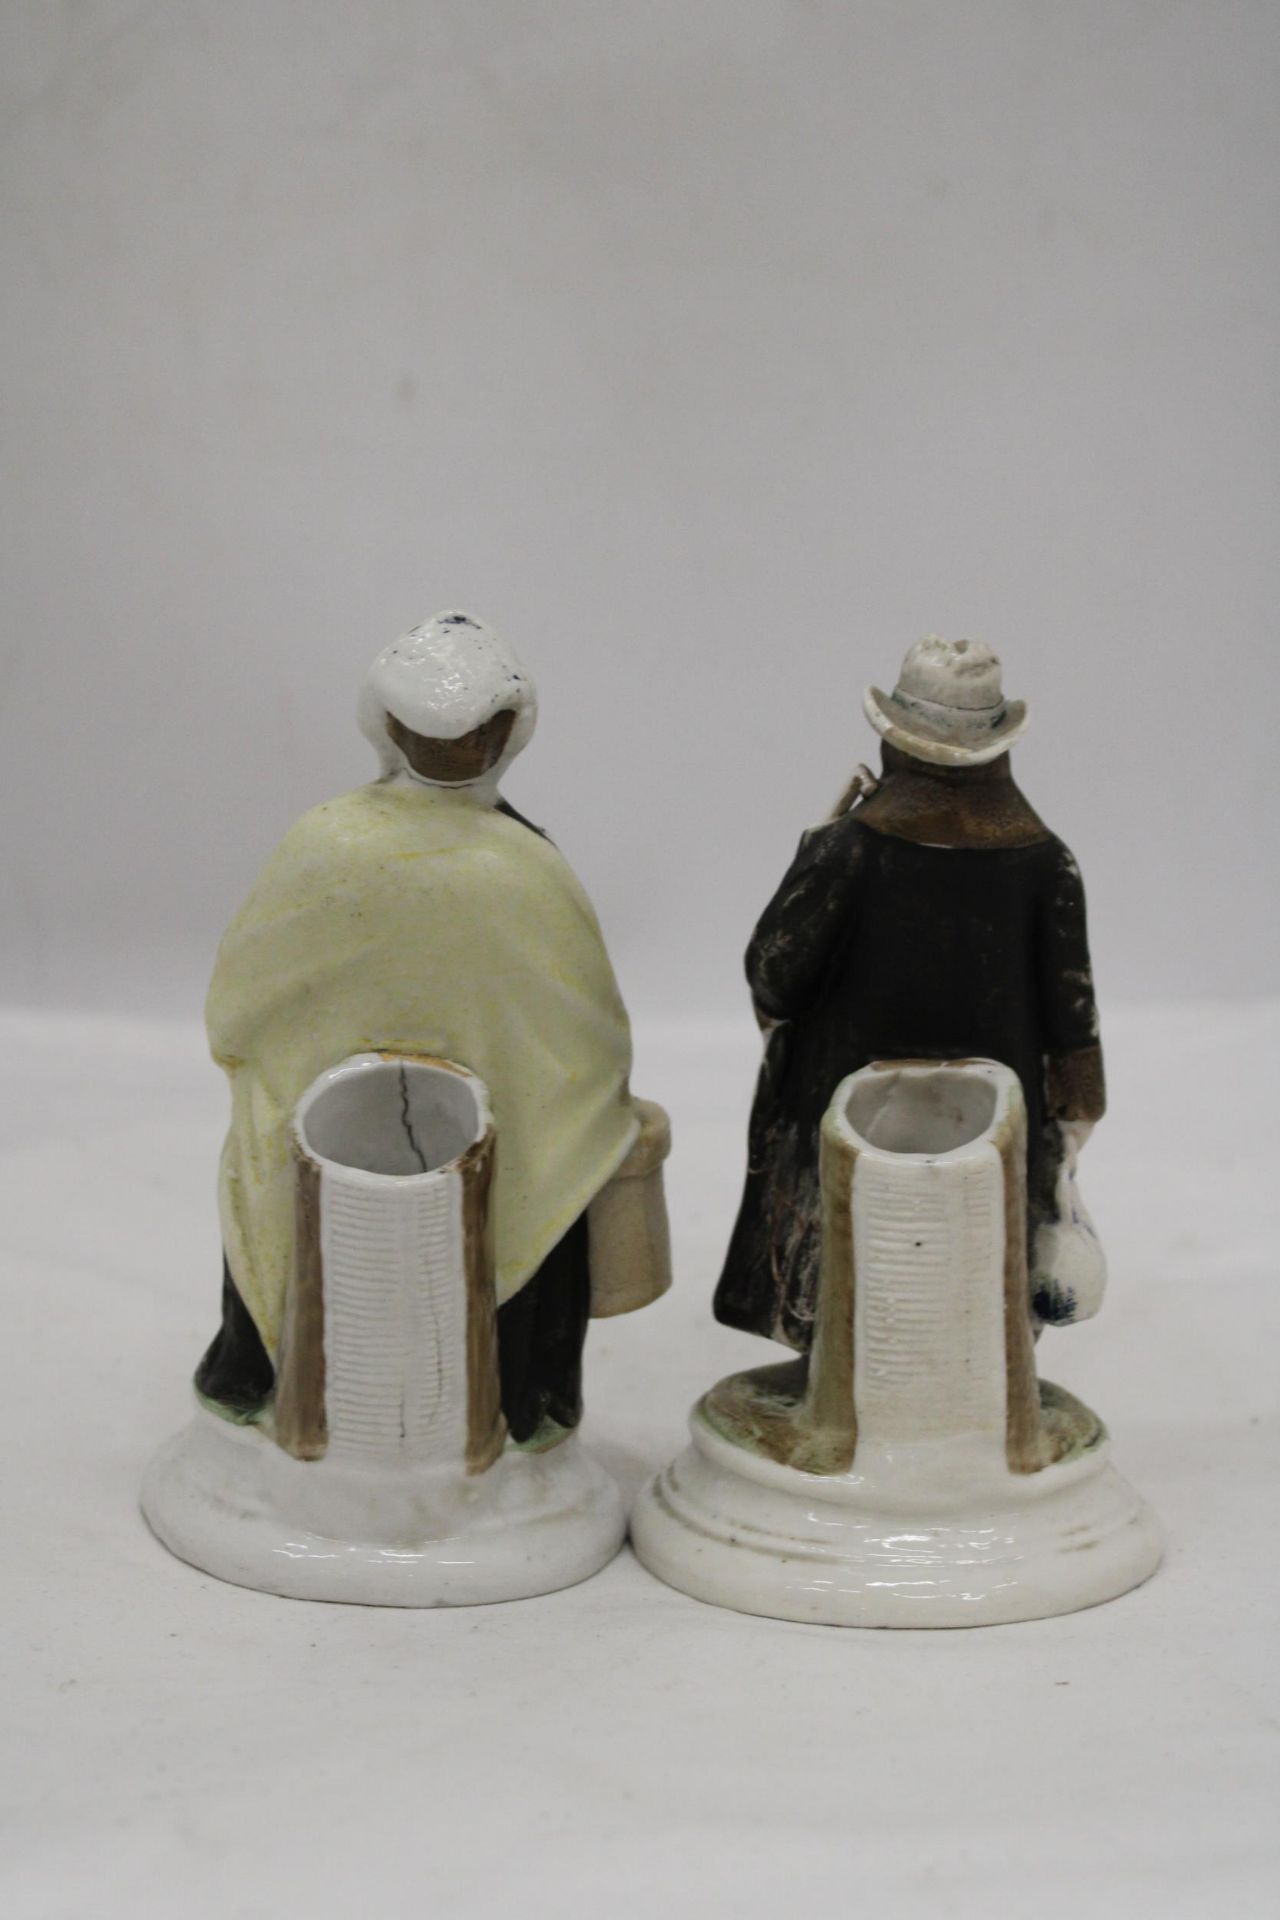 TWO ORIGINAL CONTA AND BOHME GERMAN FAIRINGS MATCHSTICK HOLDERS, 'I AM STARTING FOR A LONG JOURNEY', - Image 4 of 6